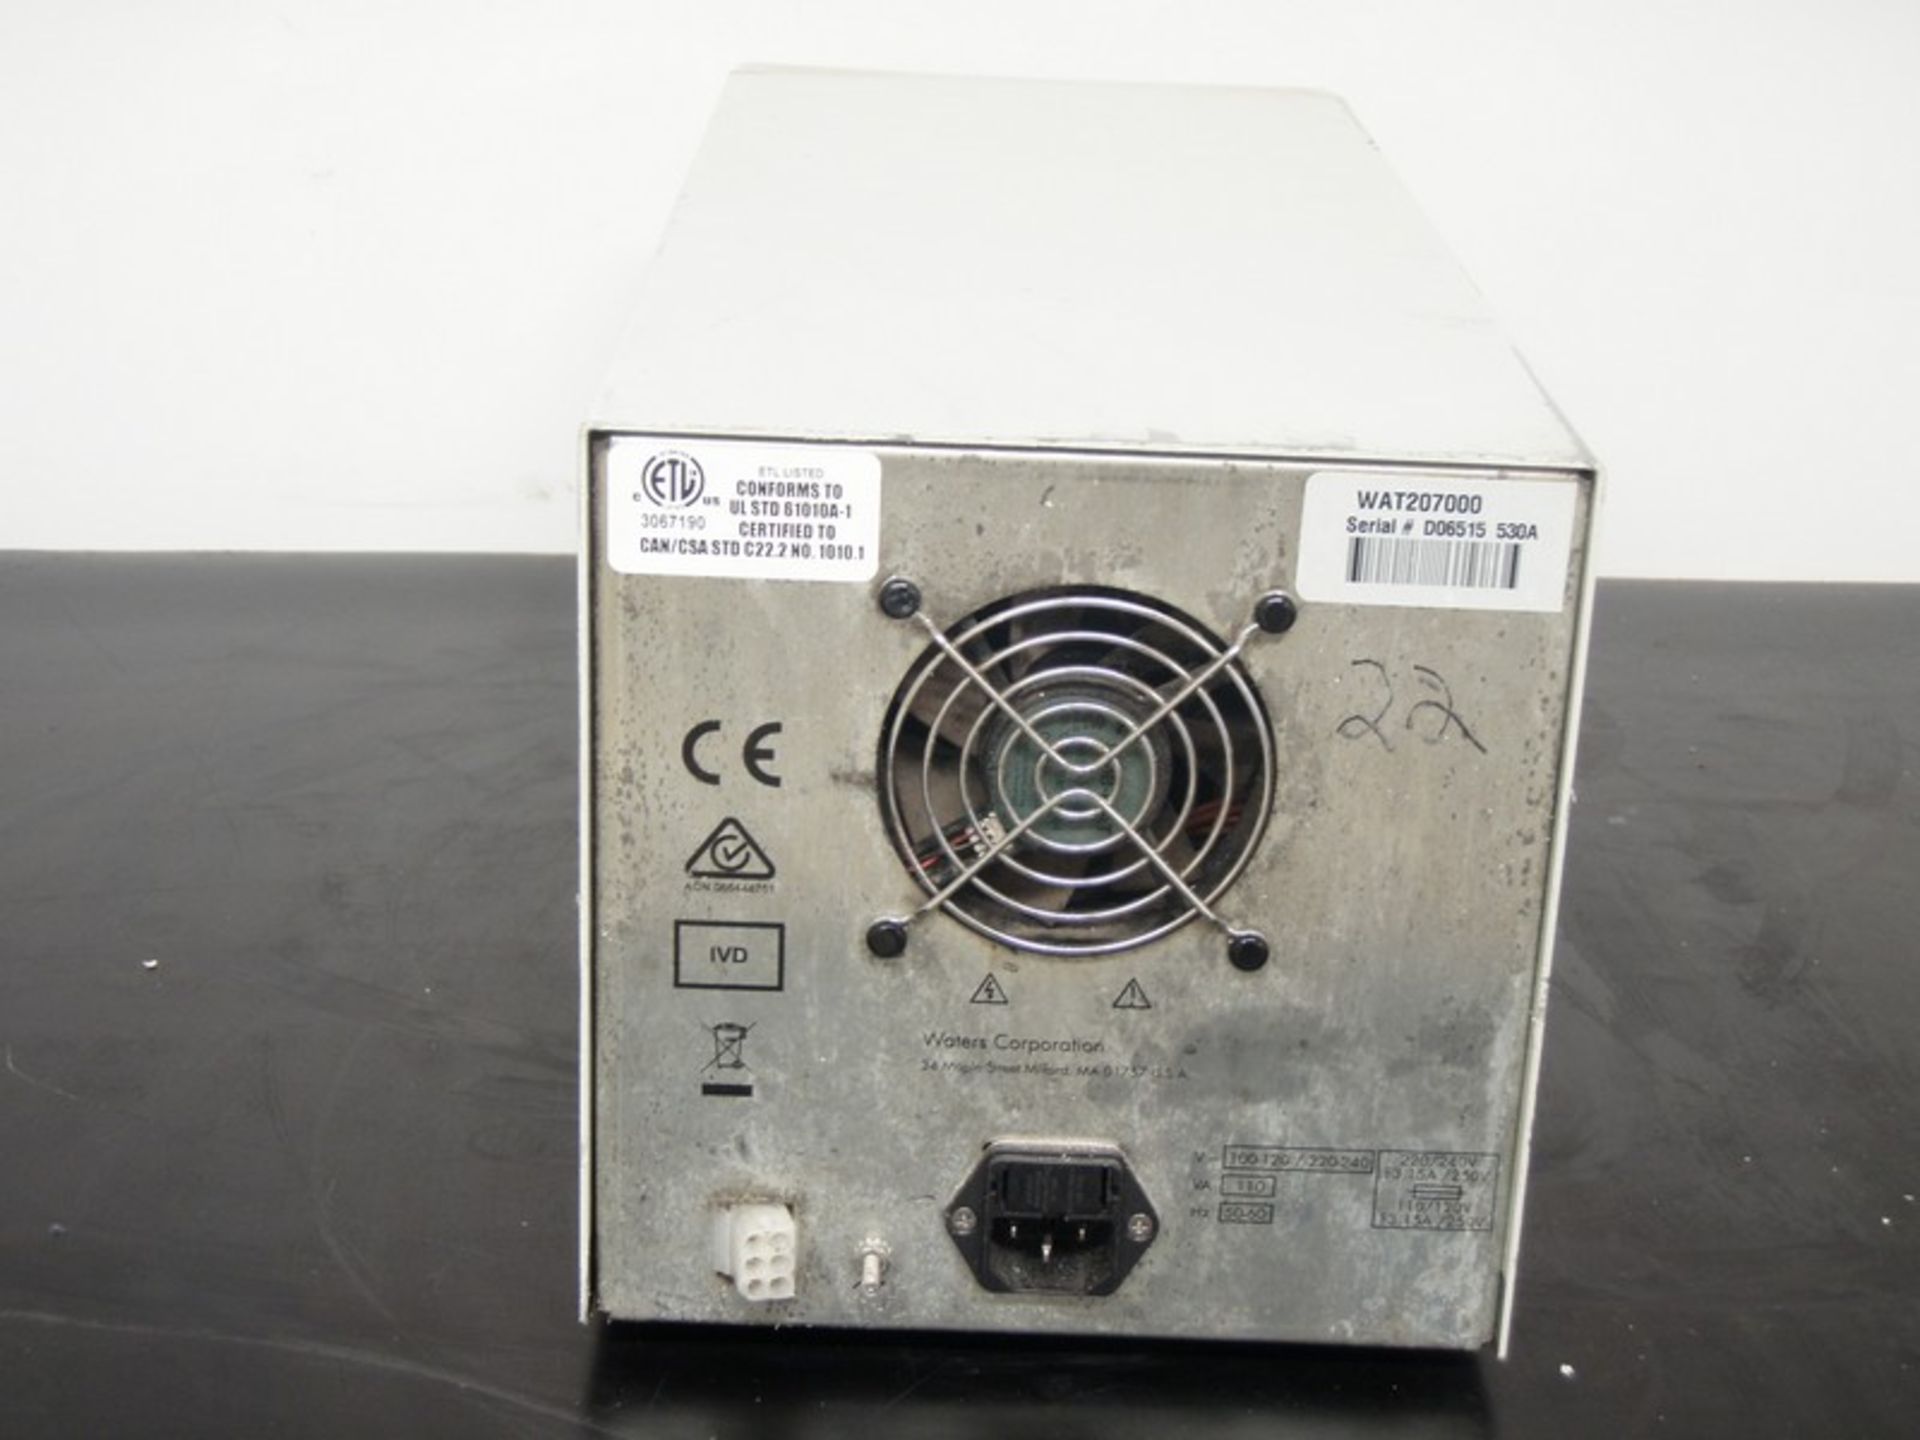 Waters 515 HPLC Pump, Model WAT20700, S/N D06515 530A (NOTE: Pump Powers On)***Located in NC*** - Image 8 of 9